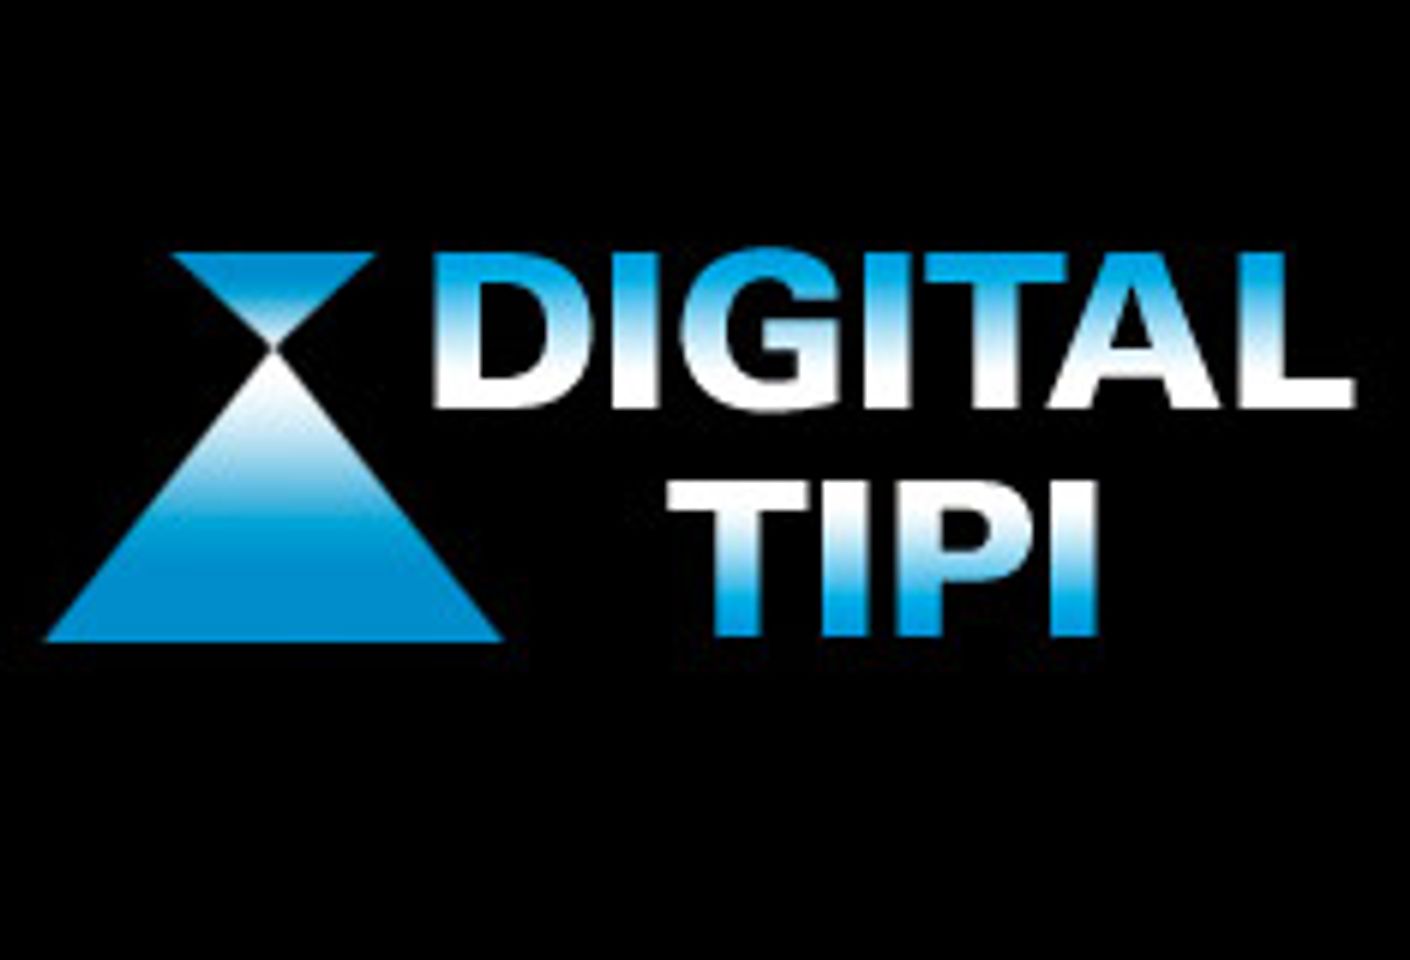 Digital Tipi Partners with Access Instructional Media to Deliver ‘Sexual Intimacy’ Videos